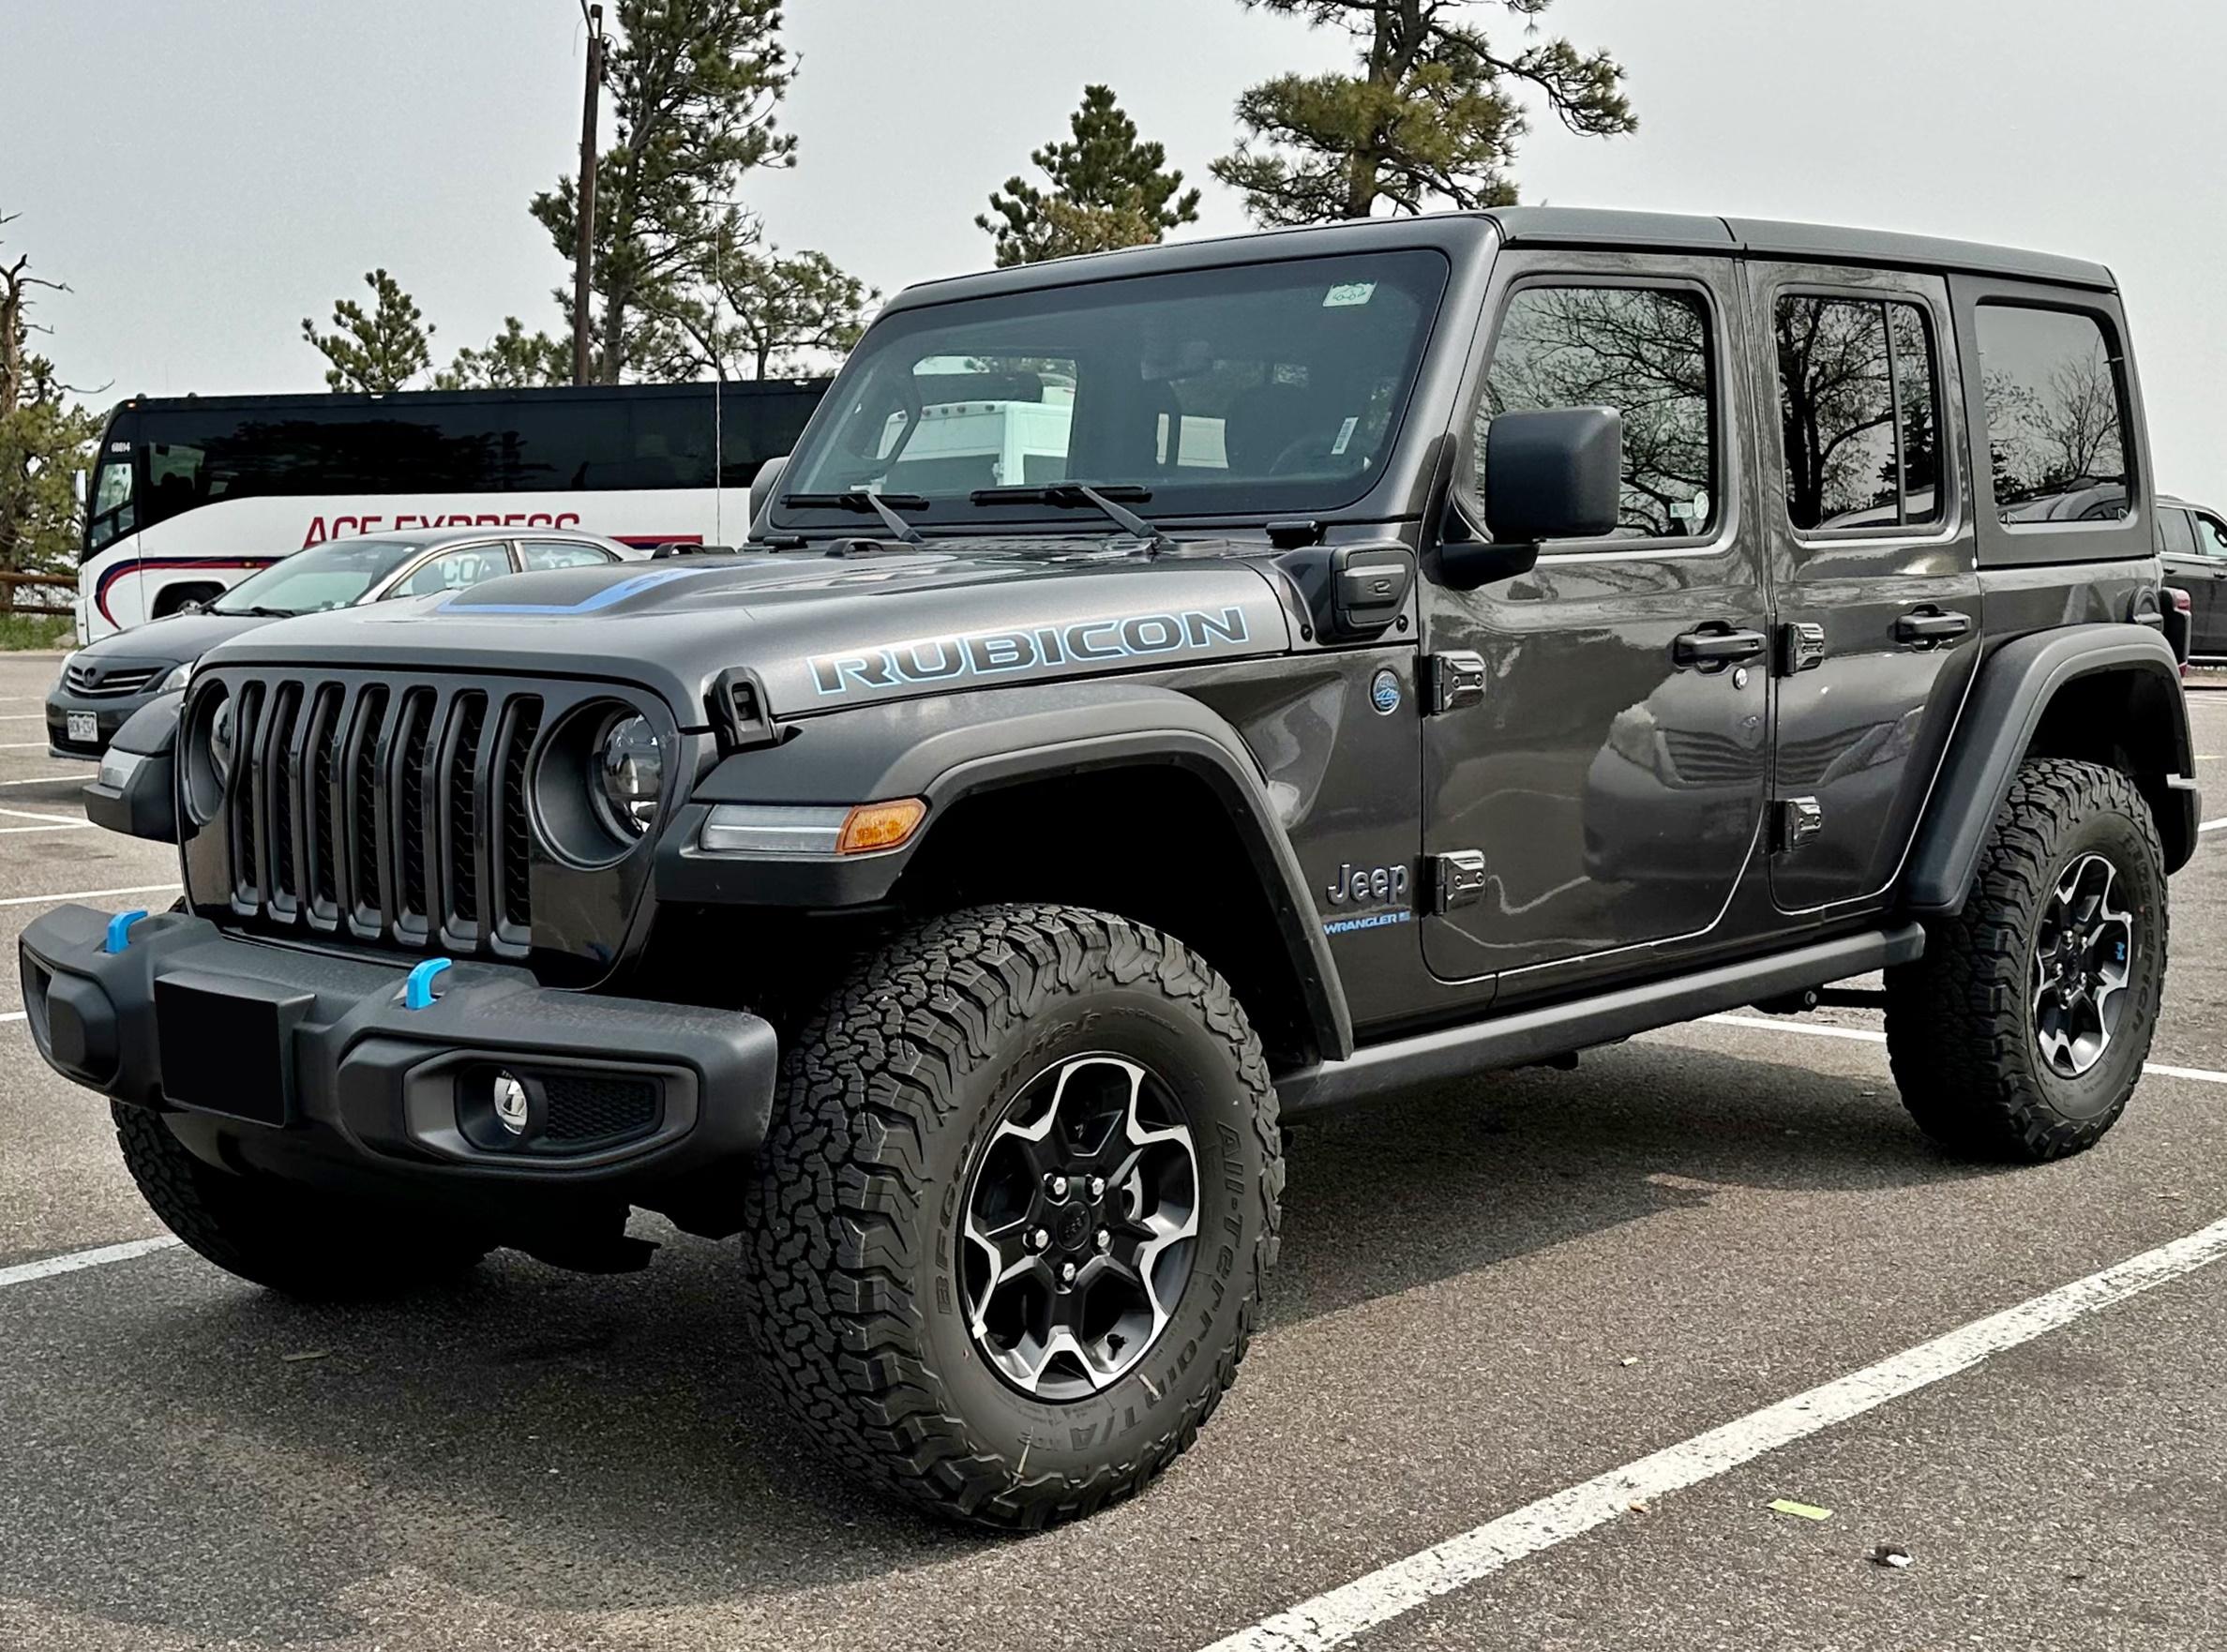 Backseat Options: Bench vs. Bucket Seats⁣ in the Jeep Wrangler